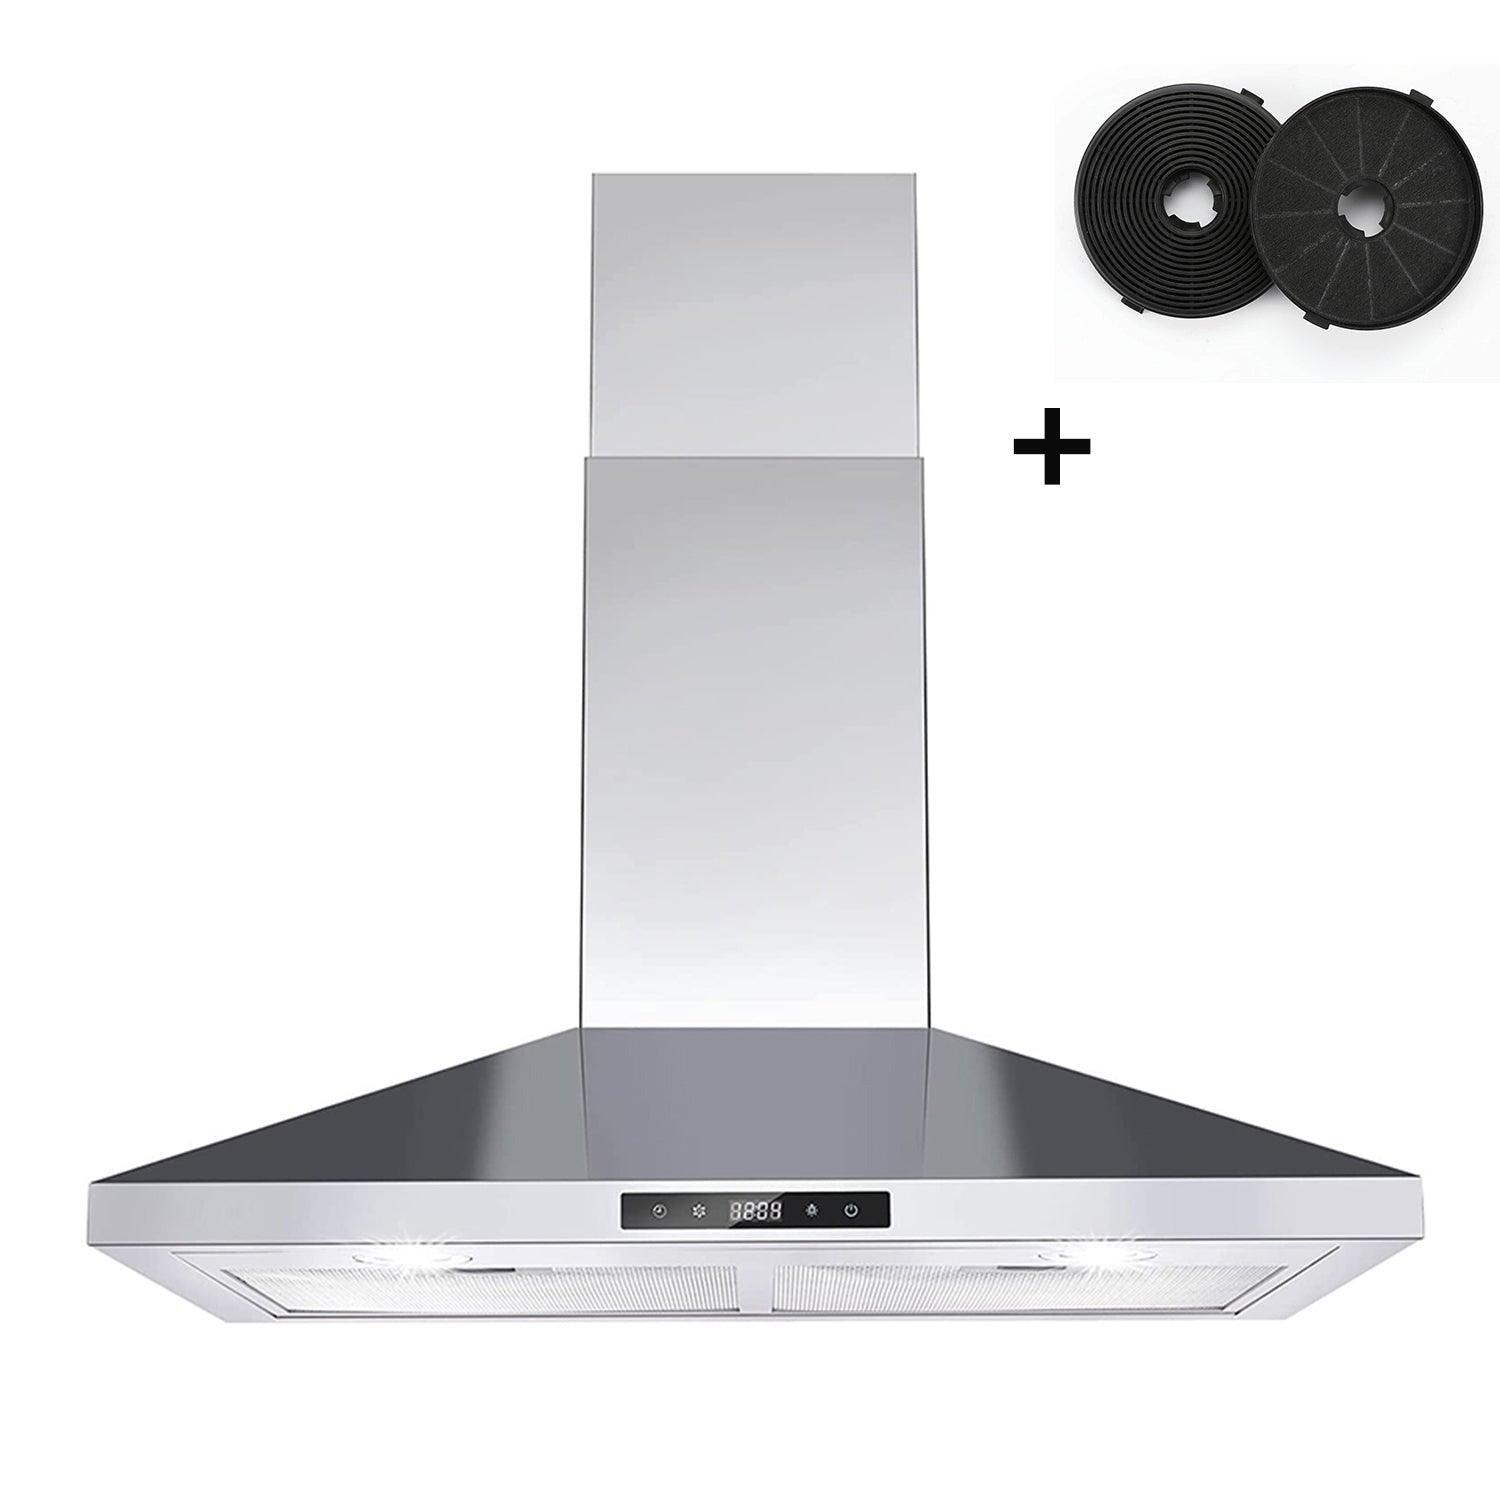 Tieasy Range Hood 30 inch Wall Mount Range Hood 450 CFM Vent Touch Control Aluminum Filters - USYS 0375A